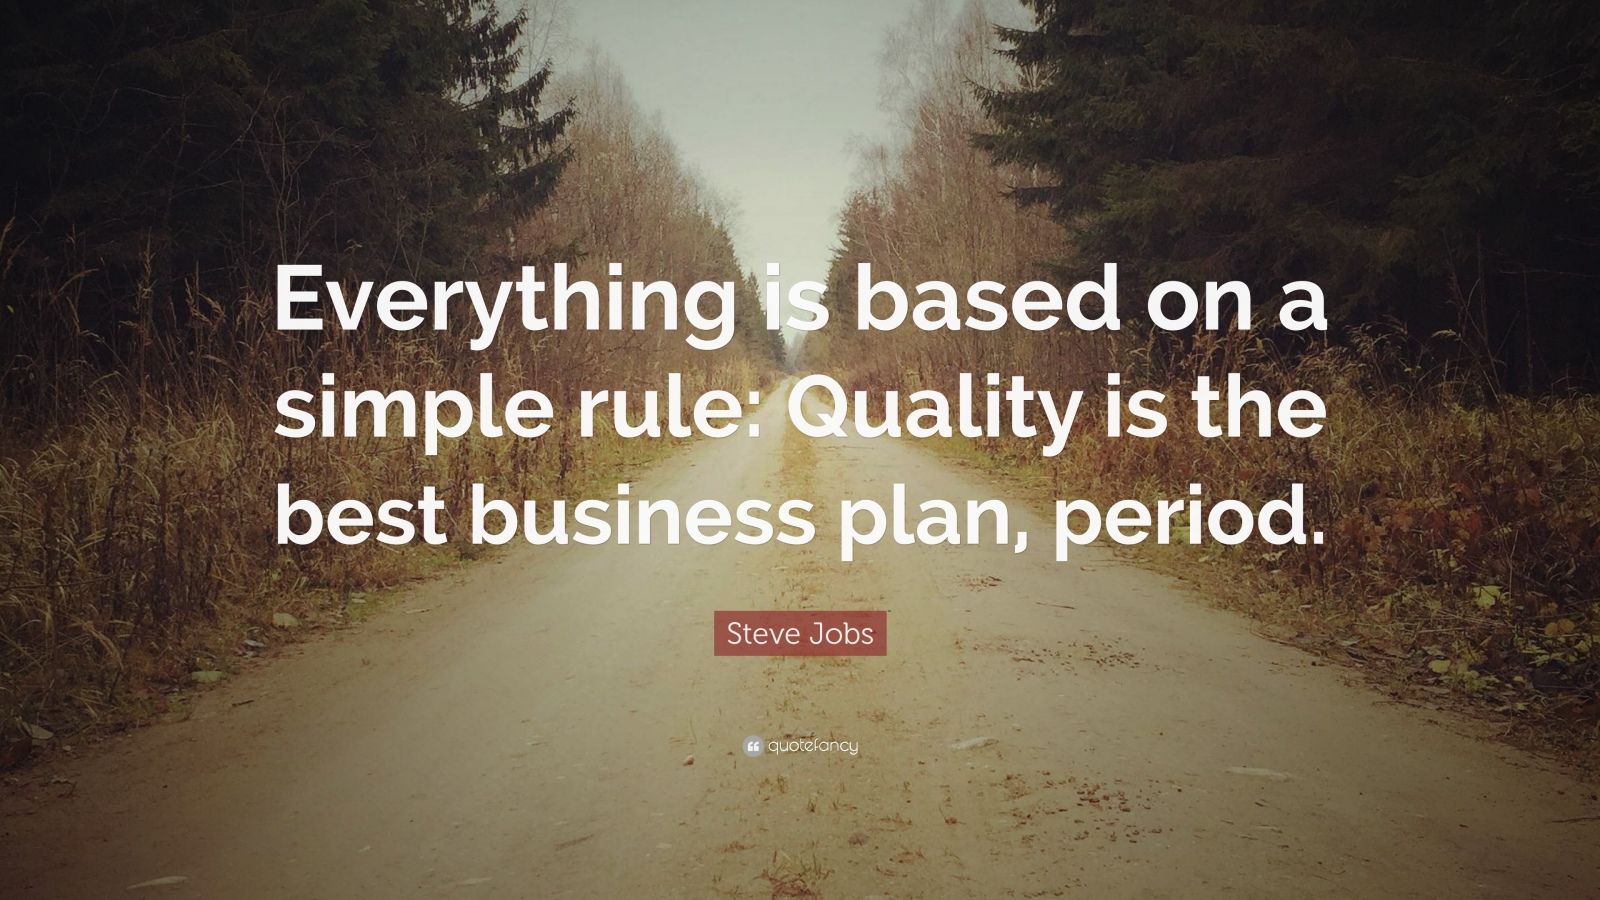 Steve Jobs Quote: “Everything is based on a simple rule: Quality is the